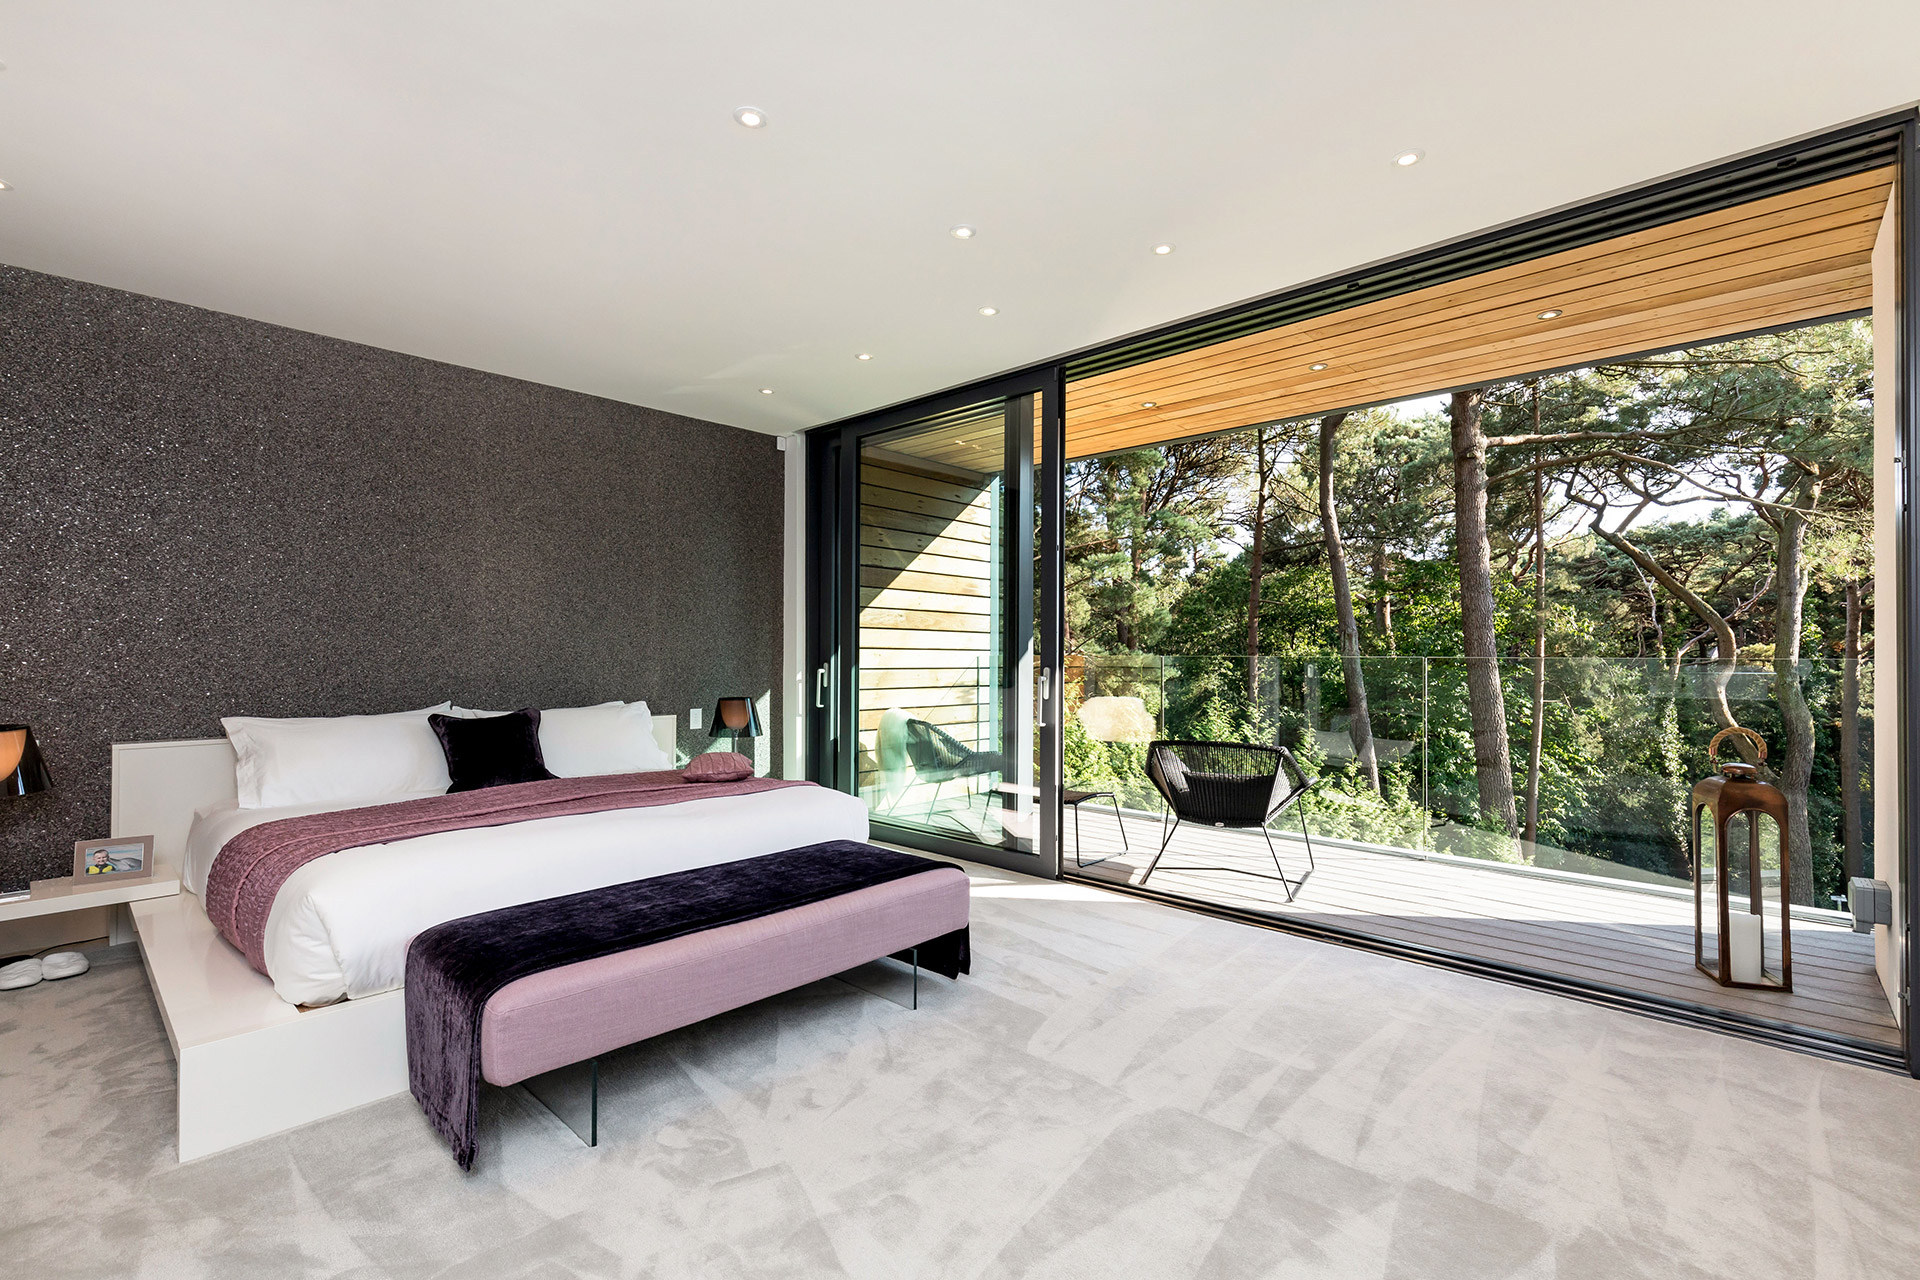 Bedroom with balcony and tree views